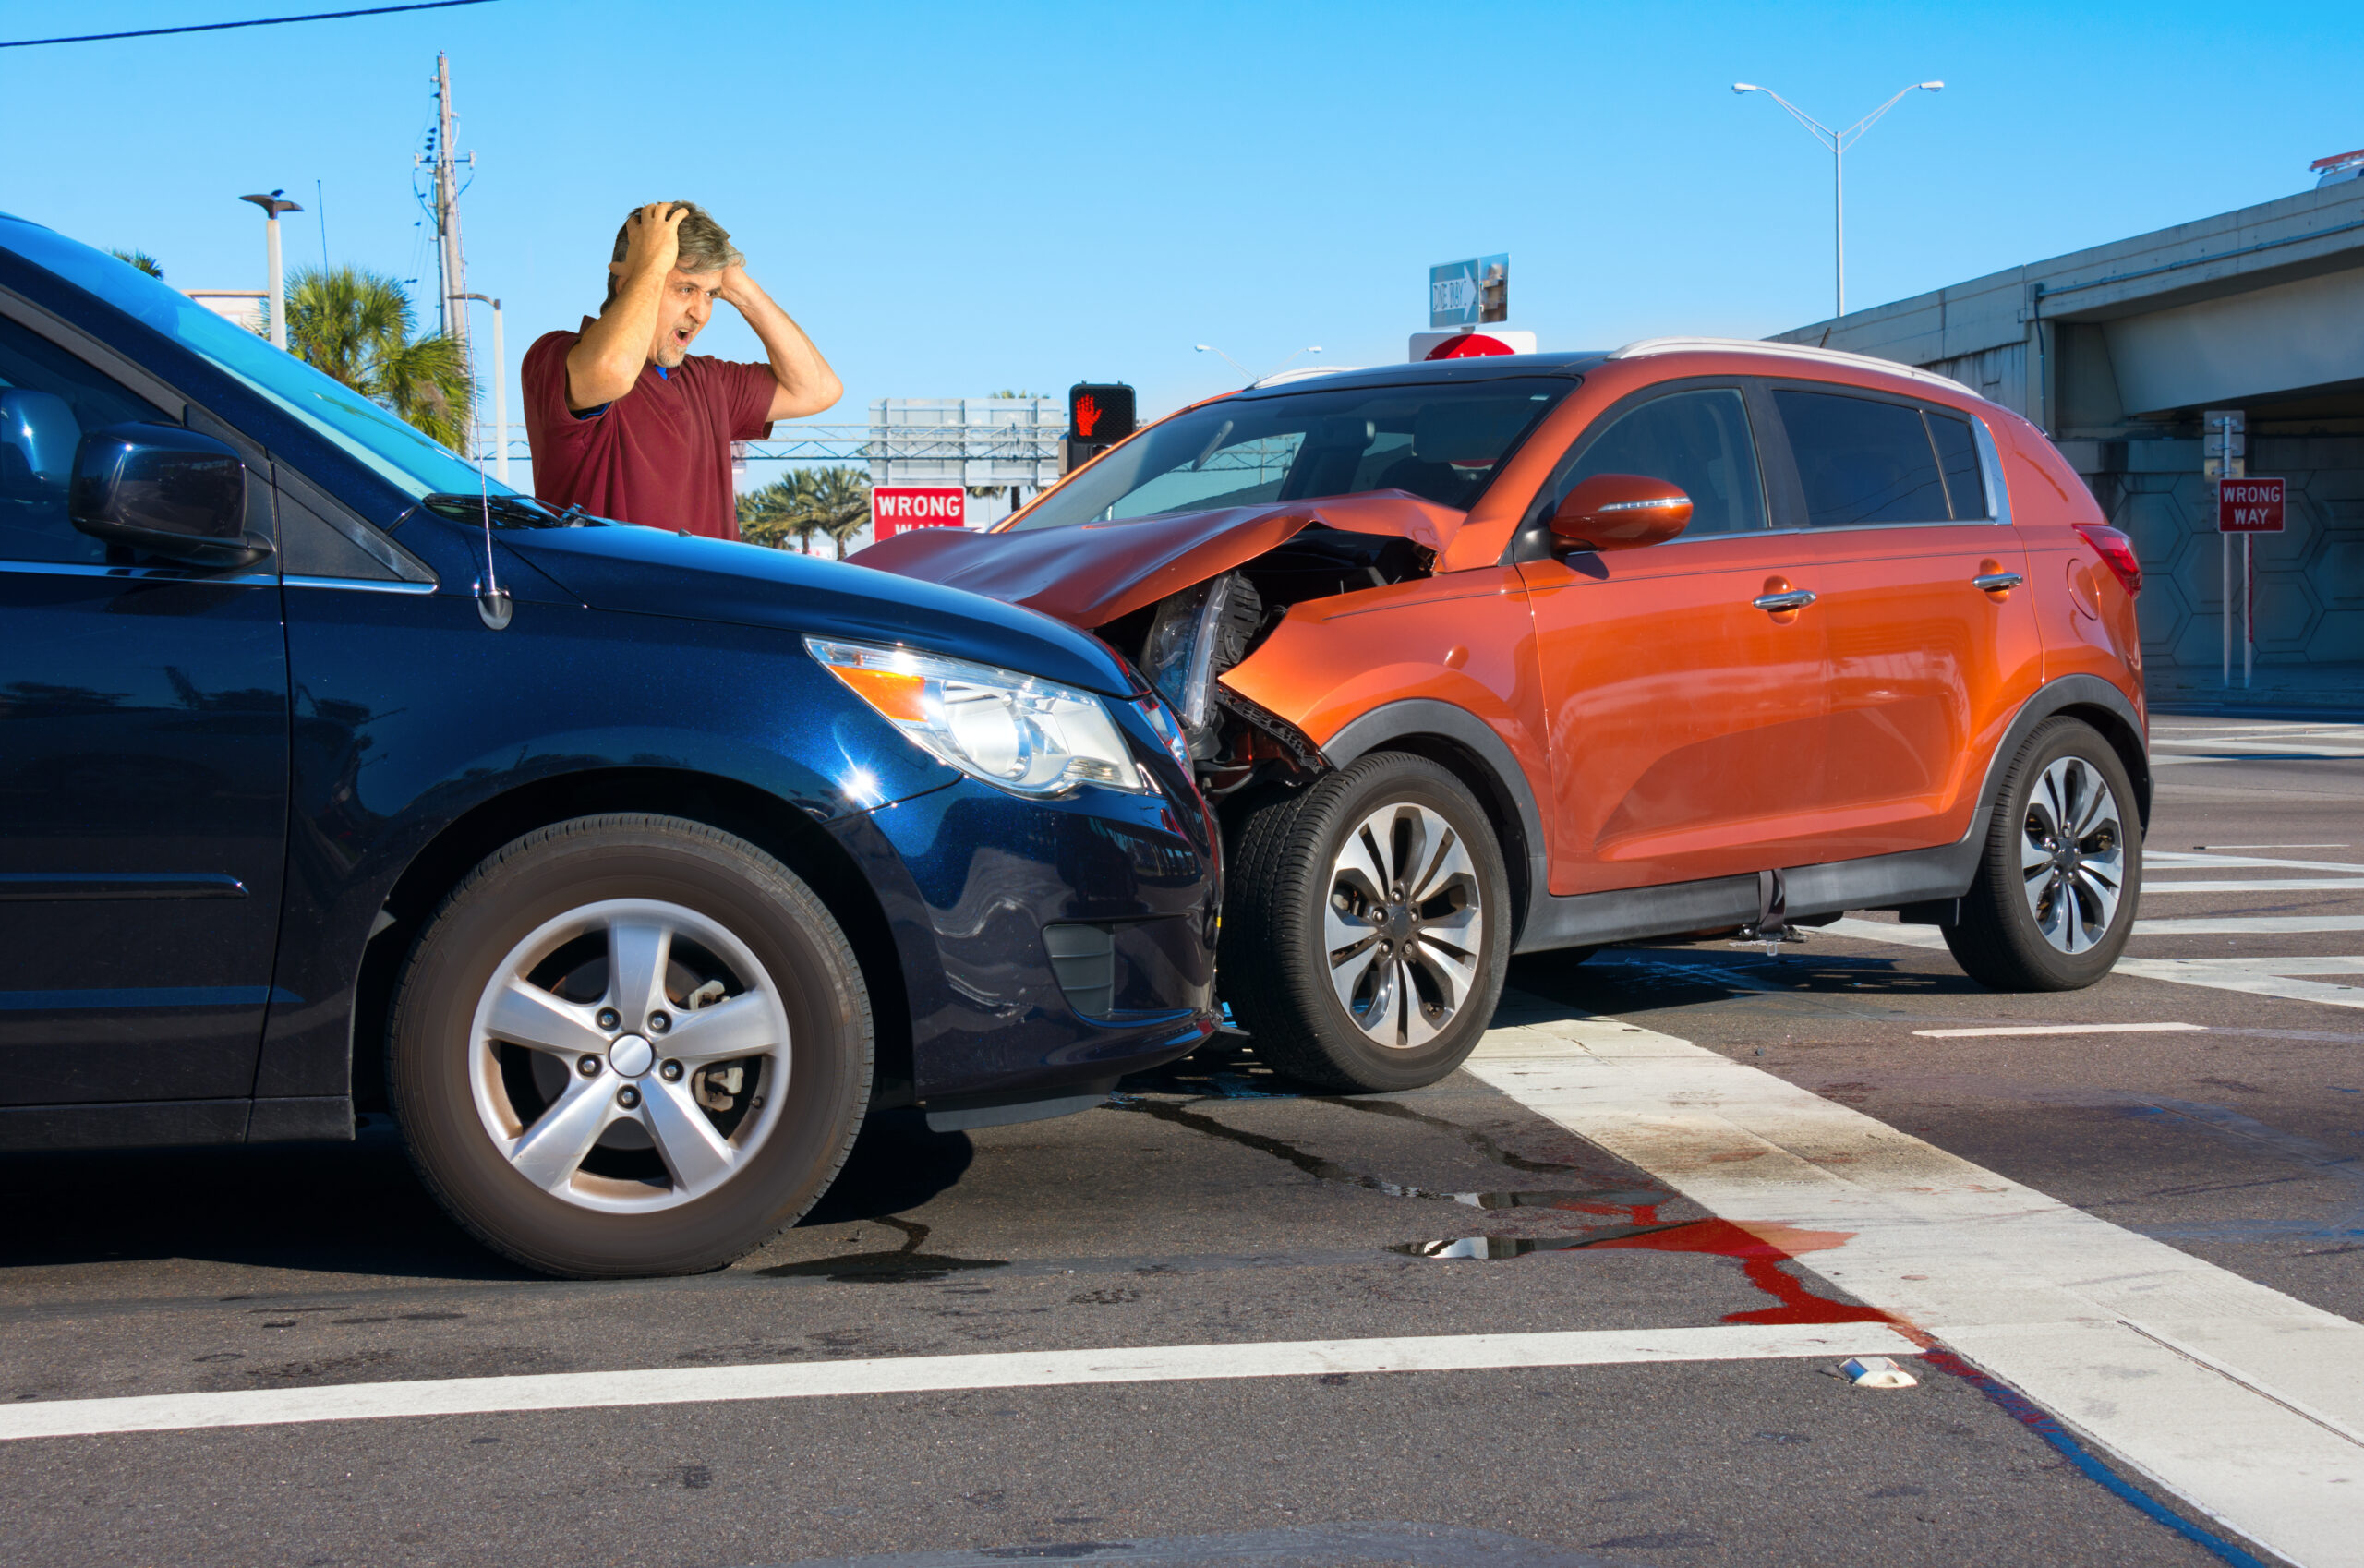 How to File a Car Accident Claim in Indiana